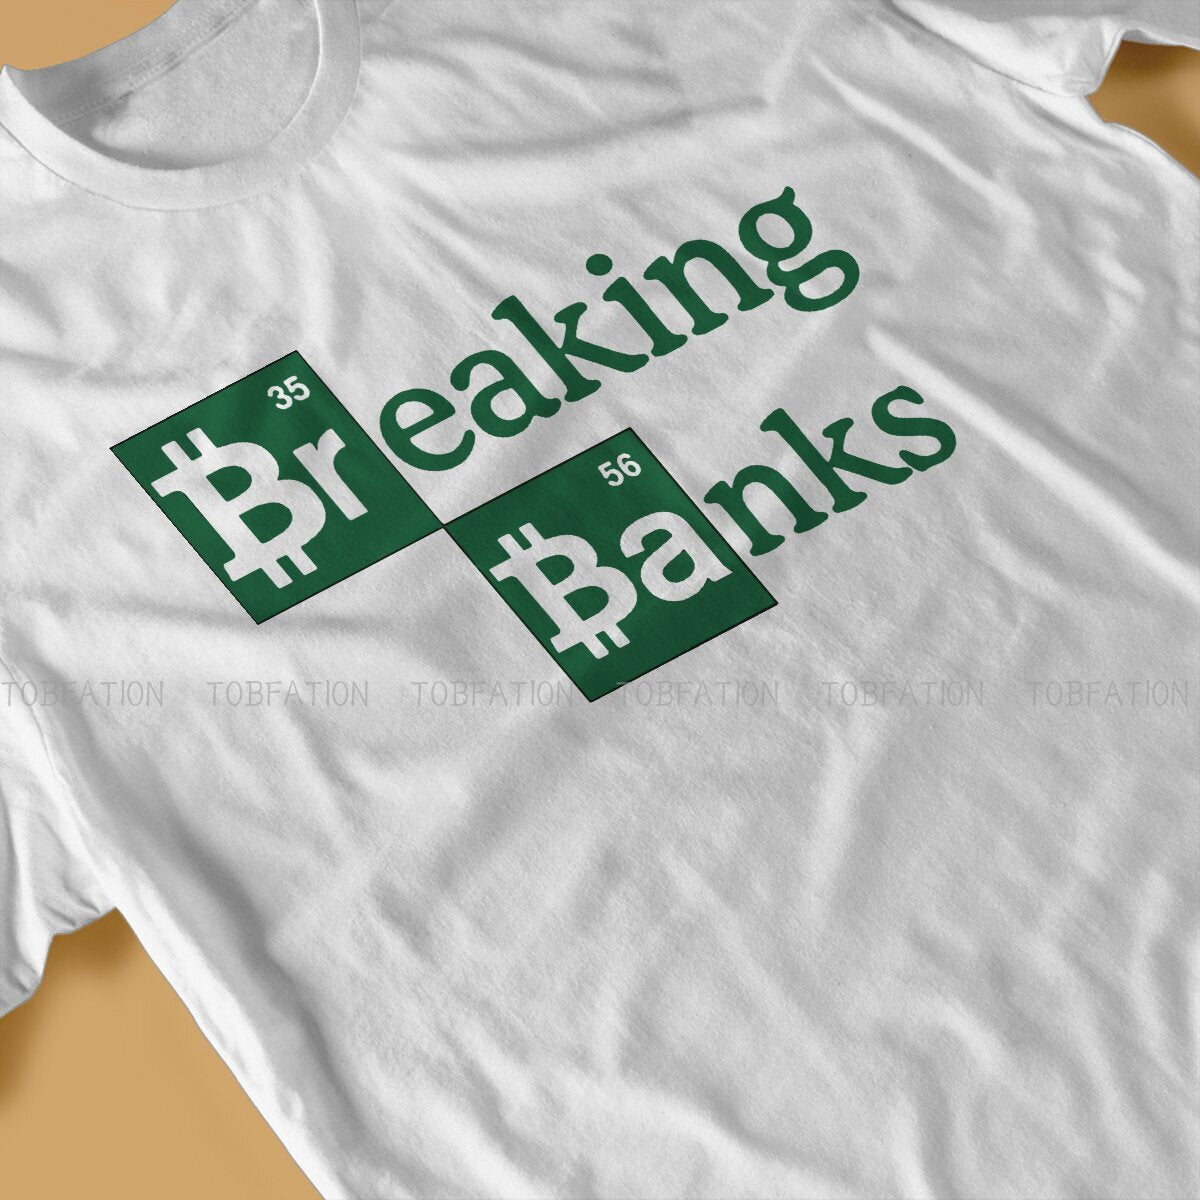 Bitcoin Breaking Banks Polyester T-Shirts